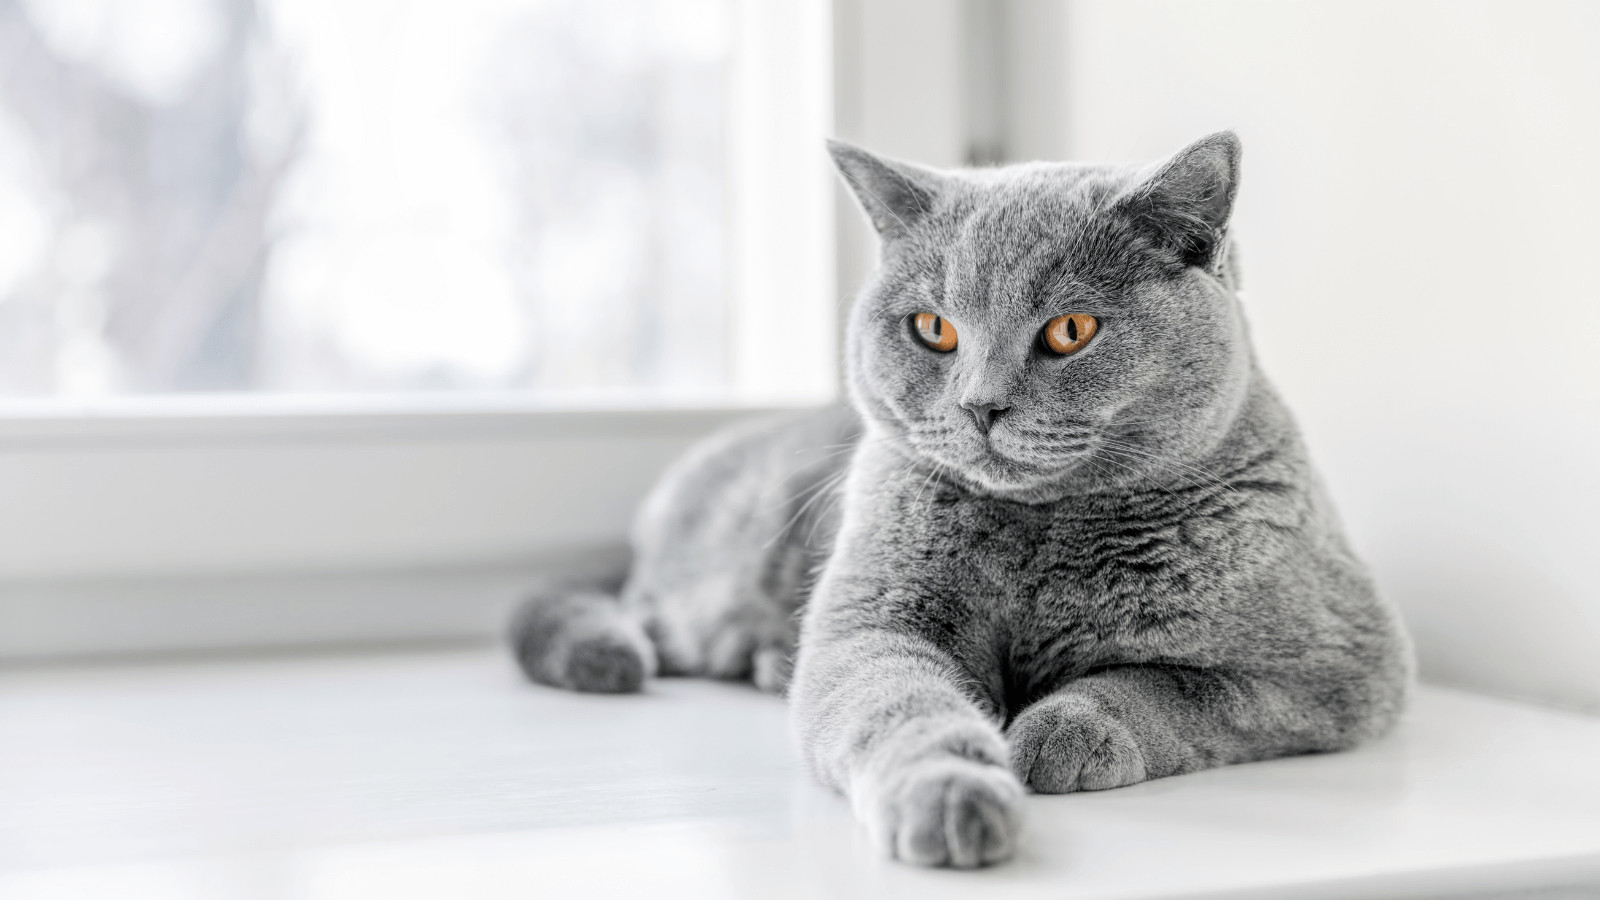 How To Train A Cat To Be Well-Behaved